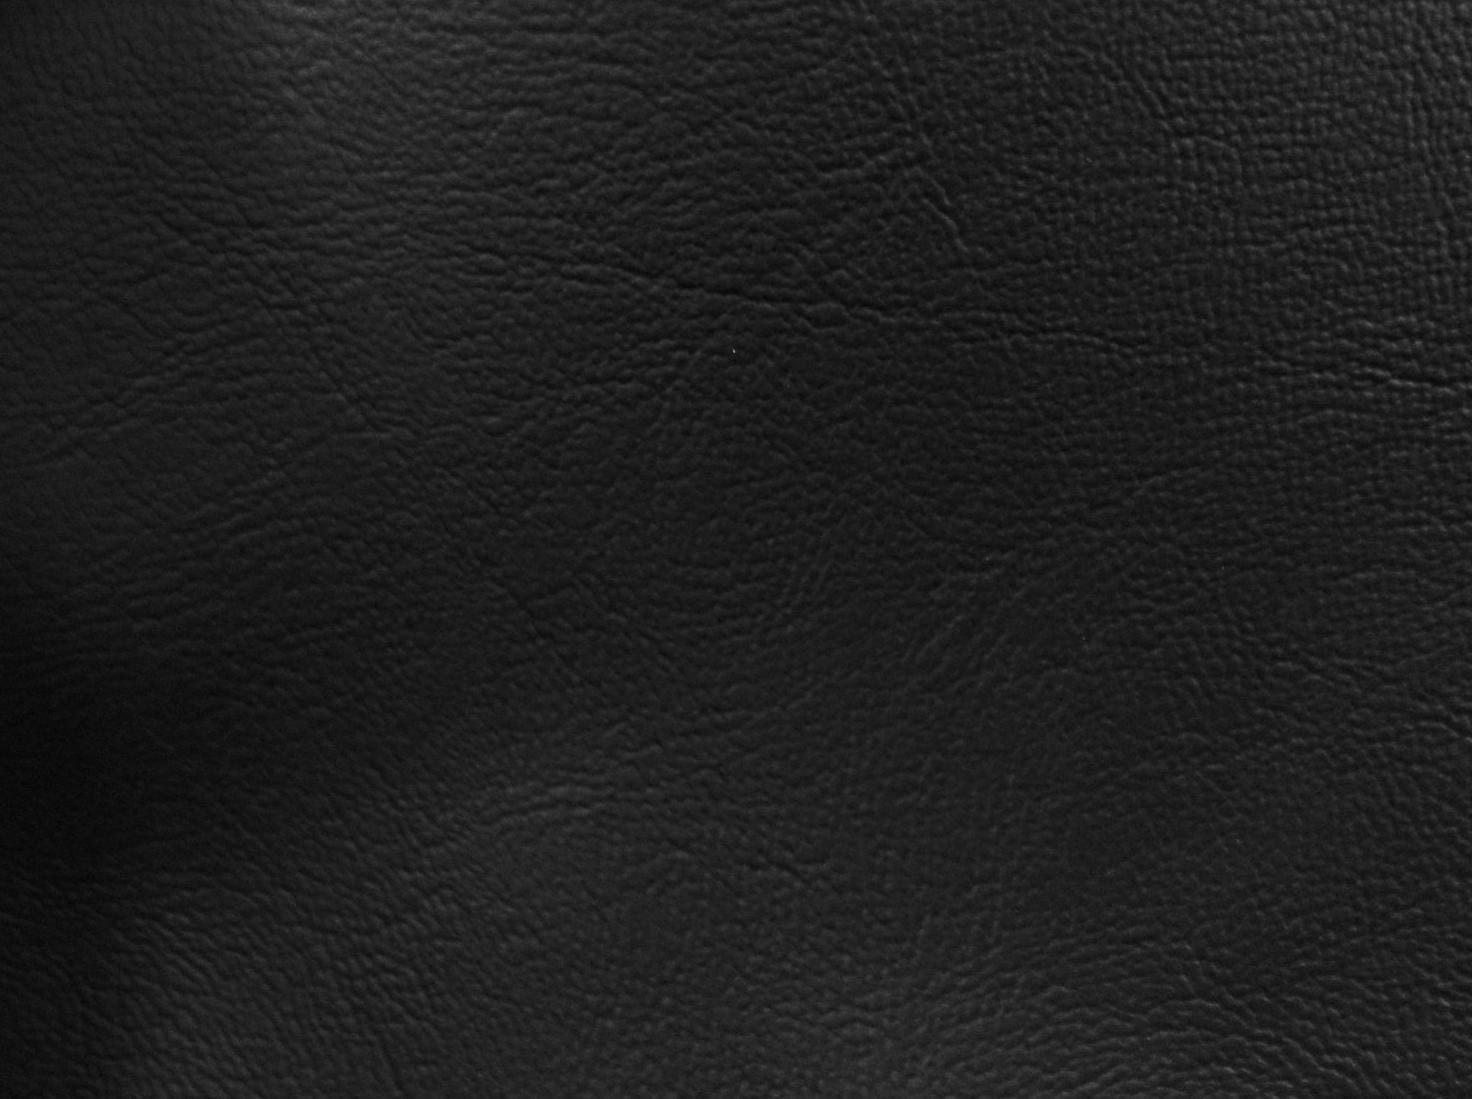 Black Leather Grain 4 Way Stretch Upholstery Fabric by The Yard